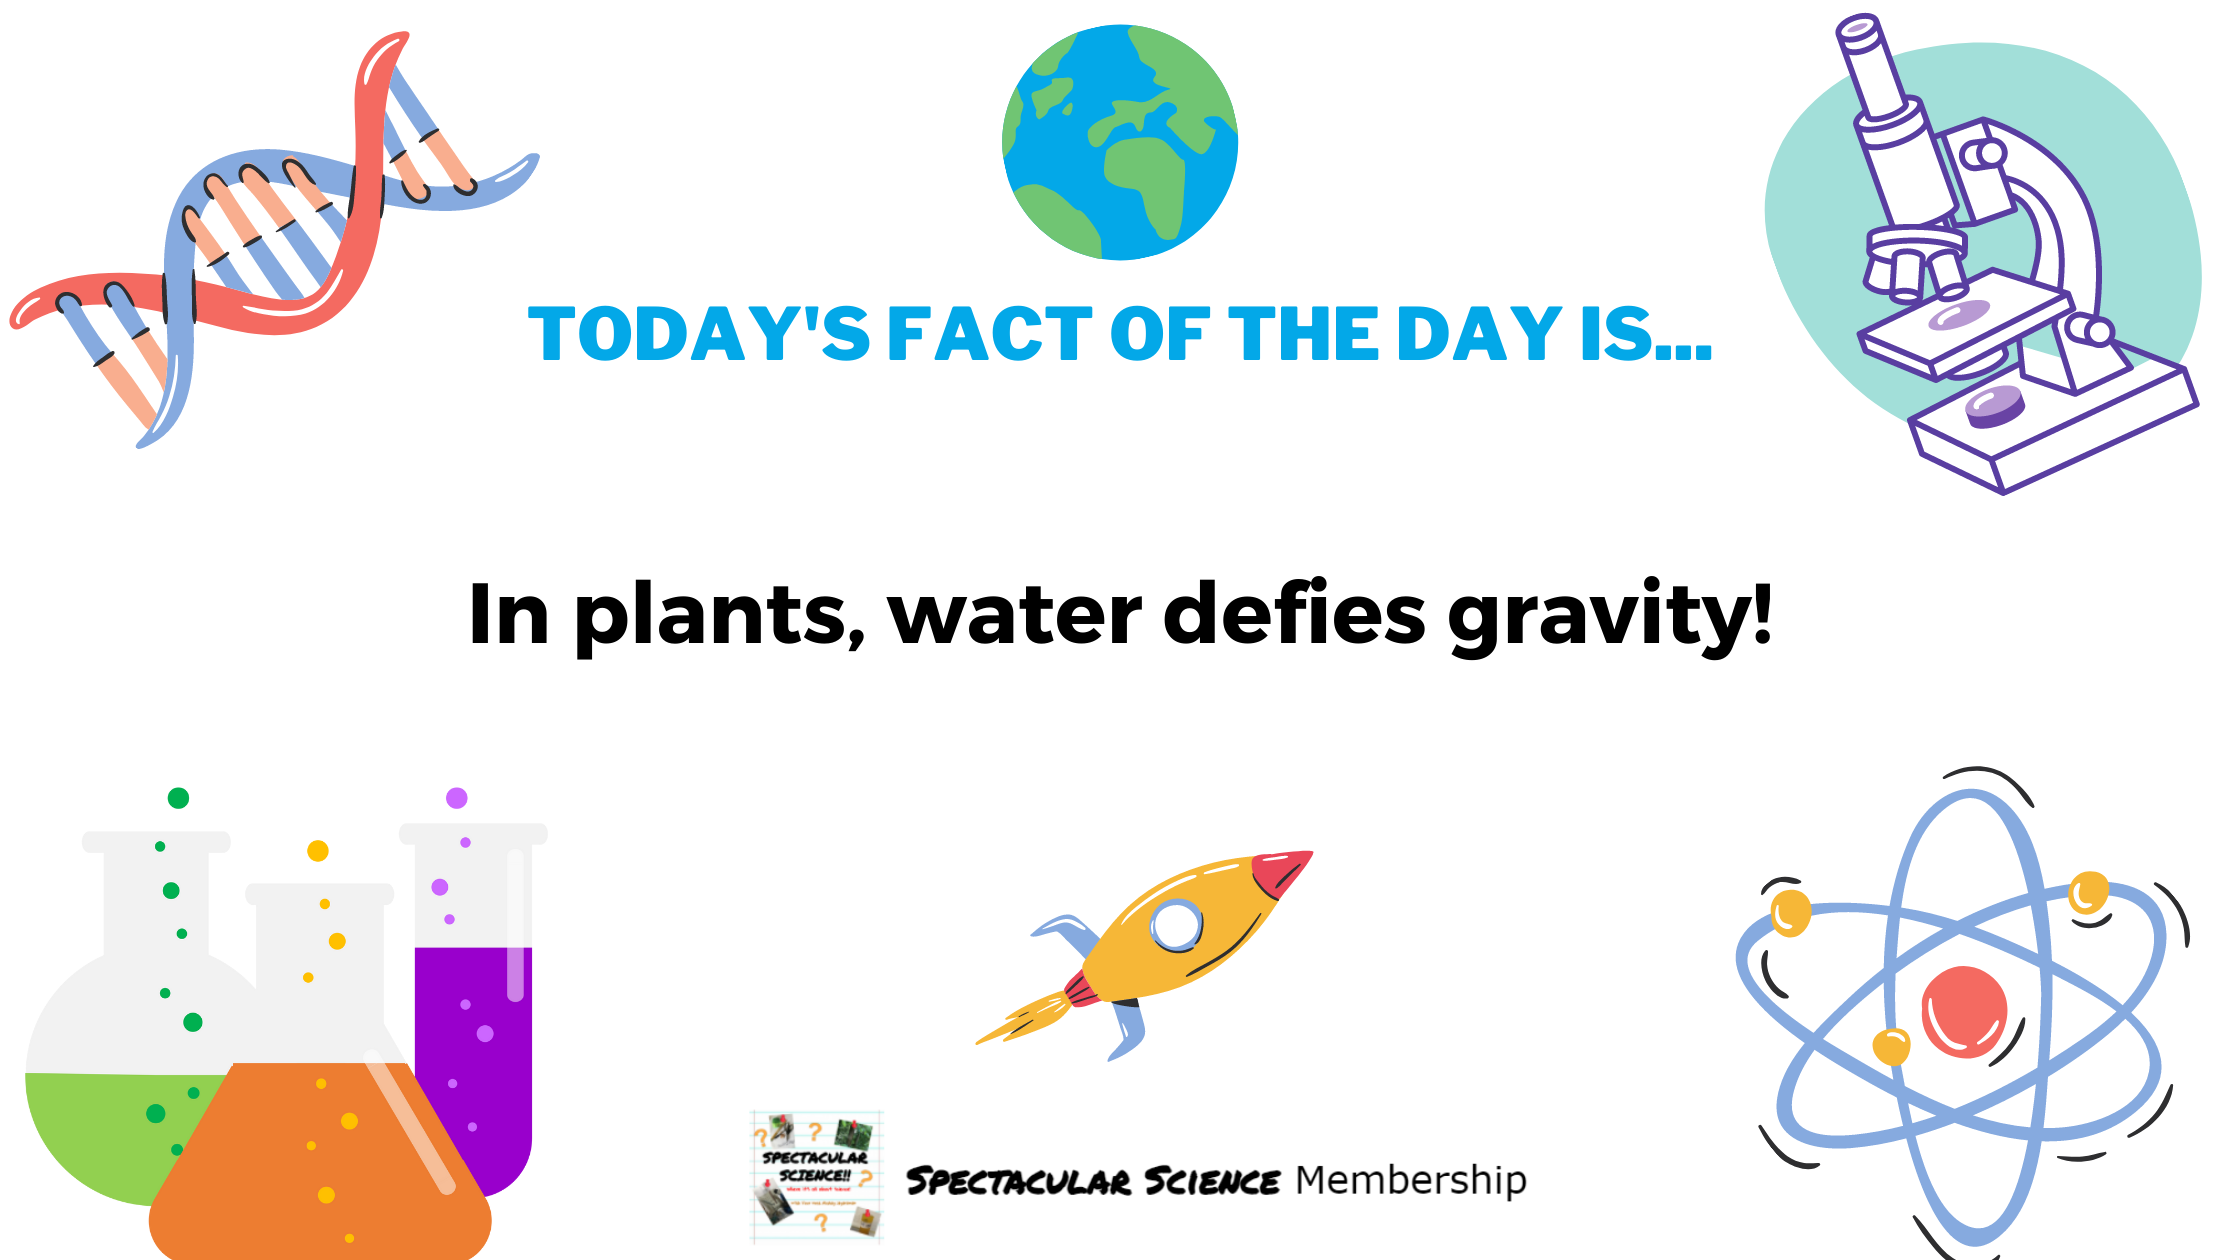 Fact of the Day Image Jan. 8th